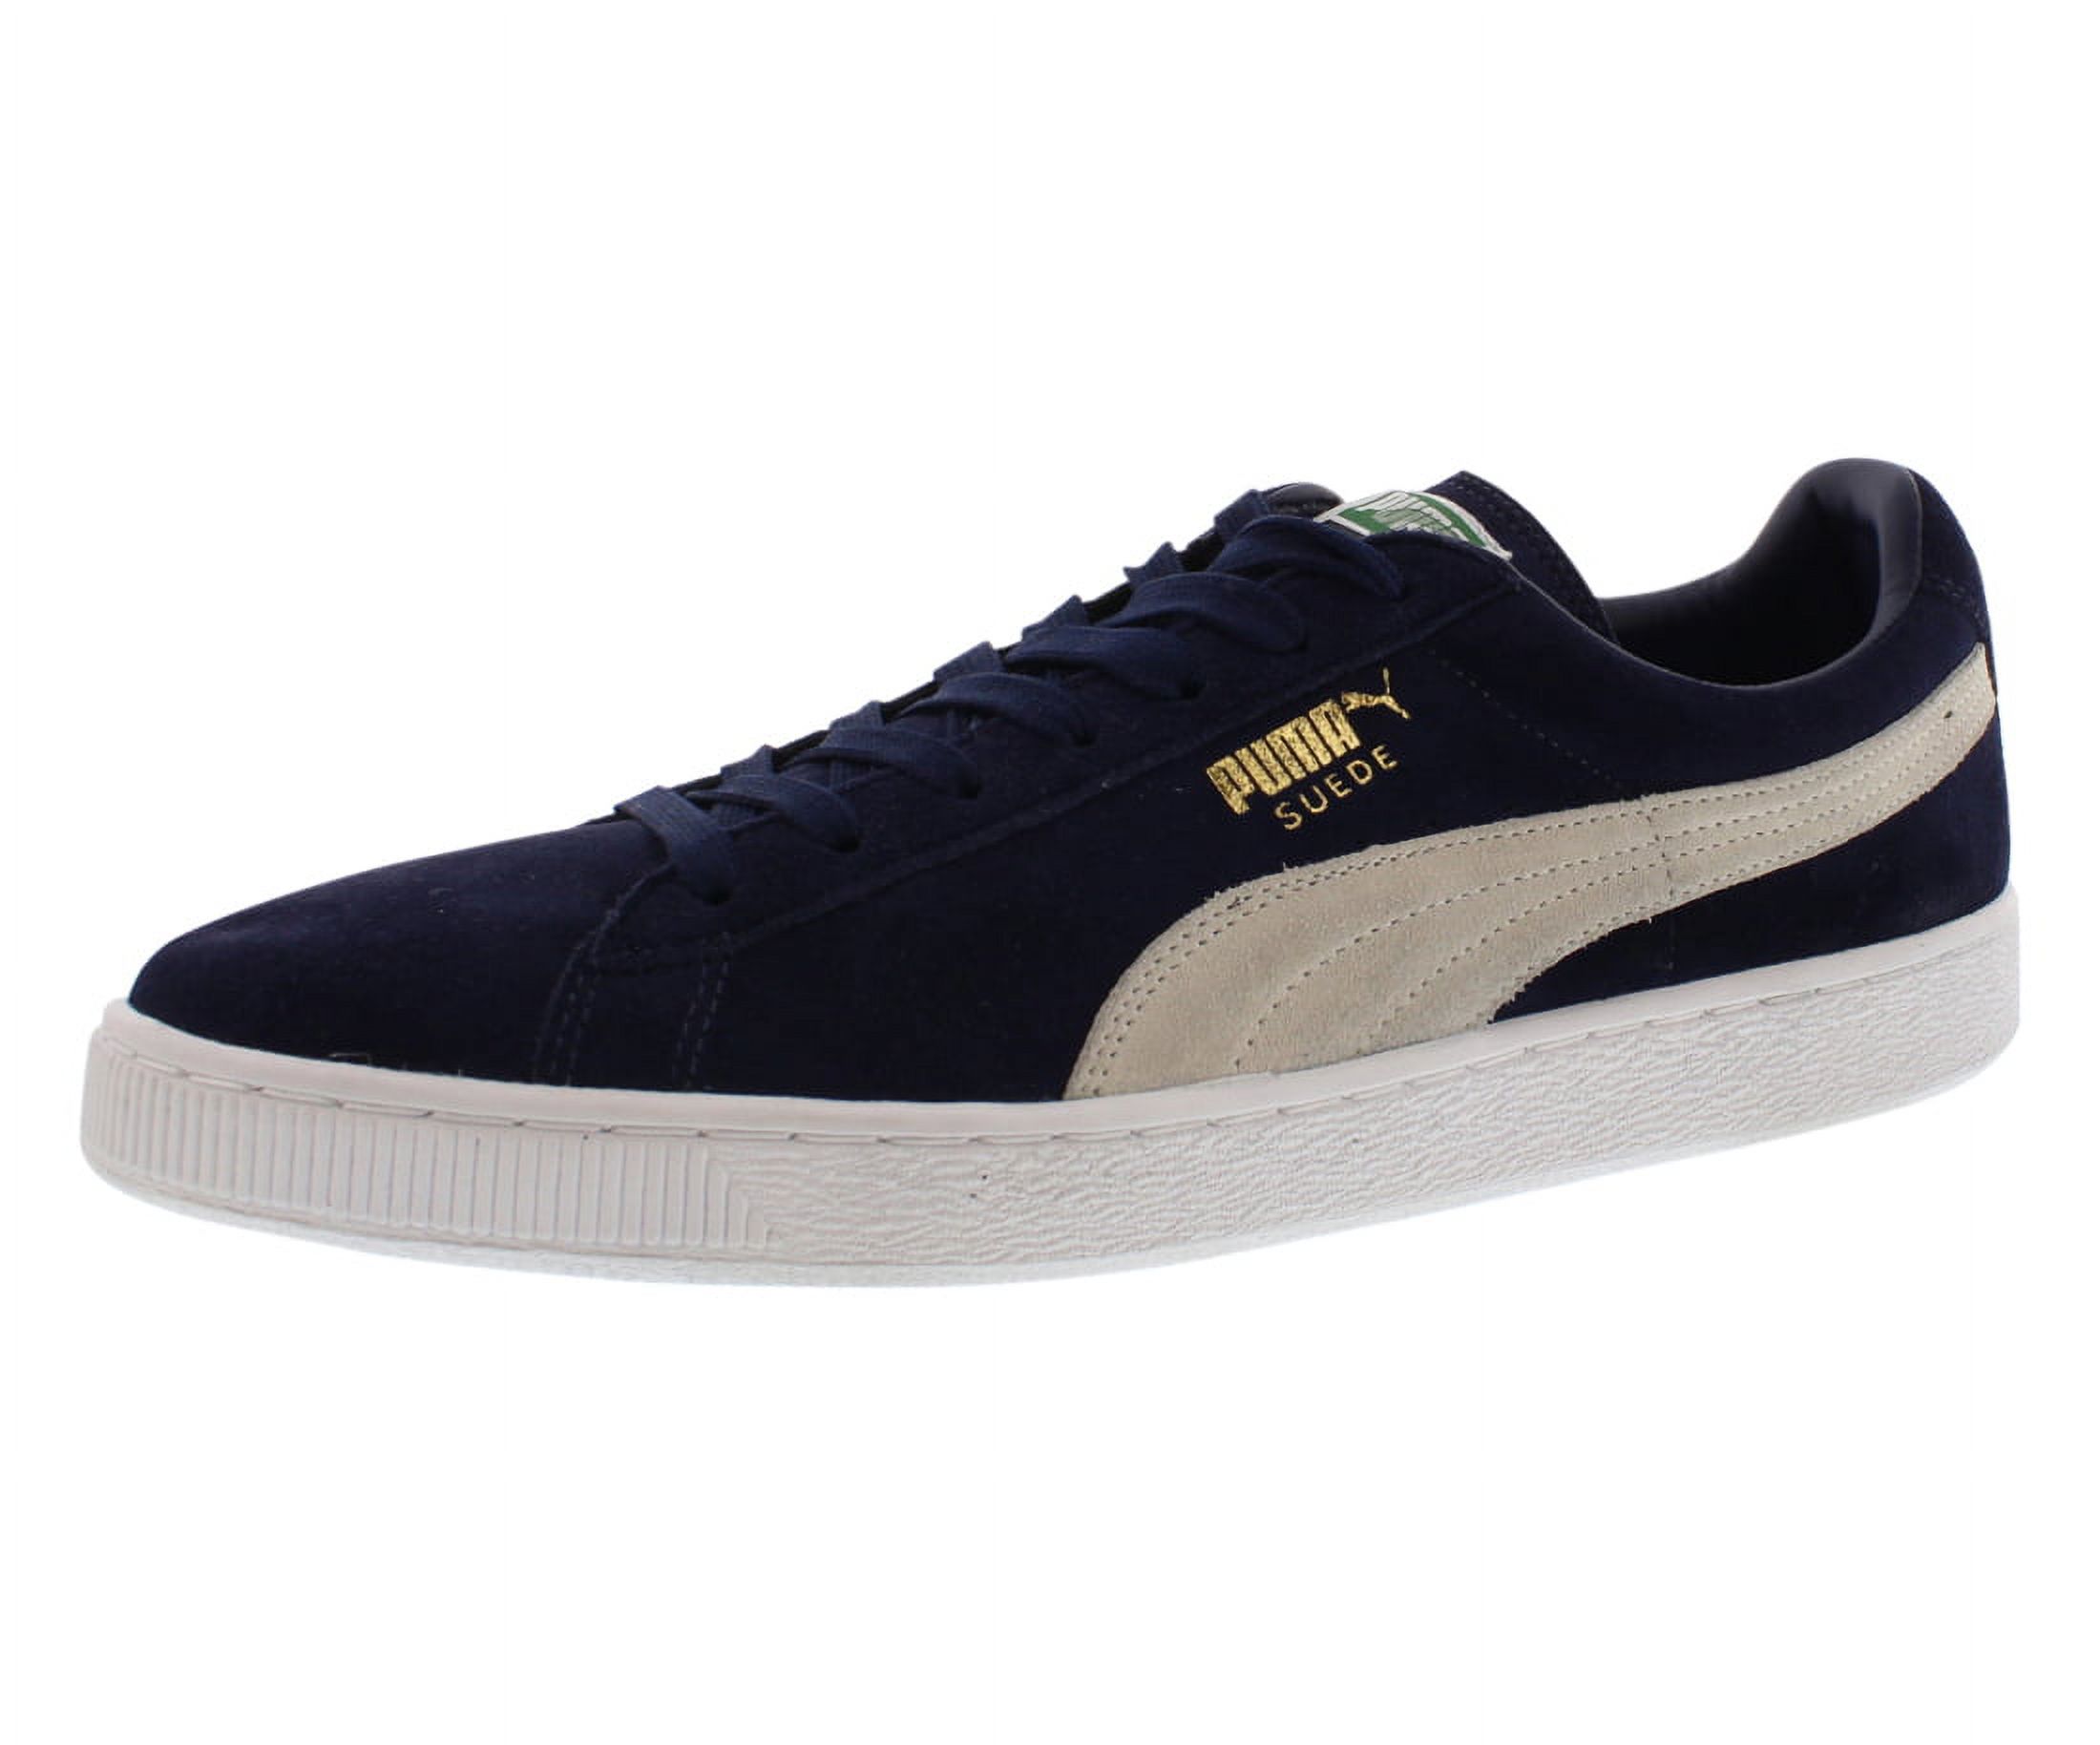 Puma Suede Classic Casual Men's Shoes - image 1 of 5